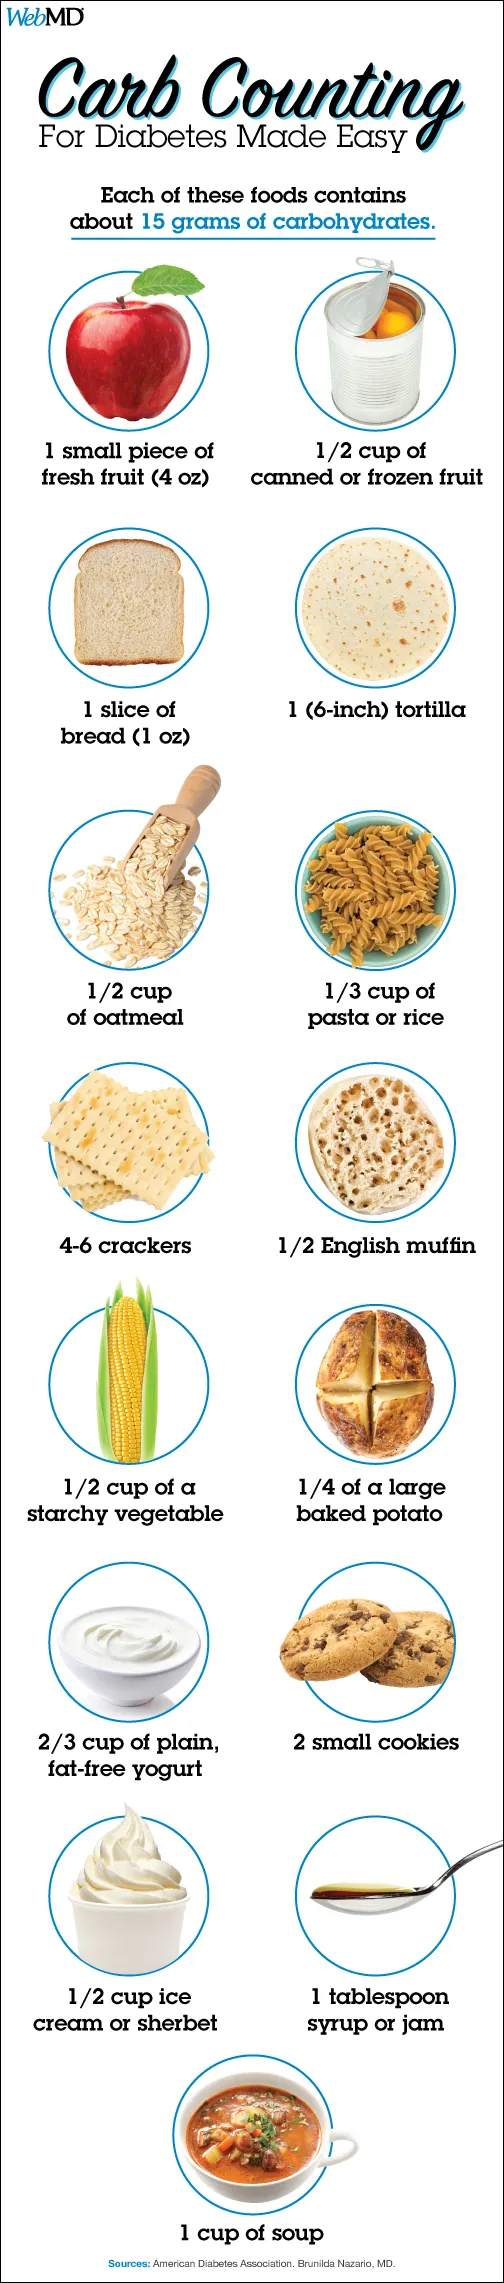 Carbohydrate Counter List Chart